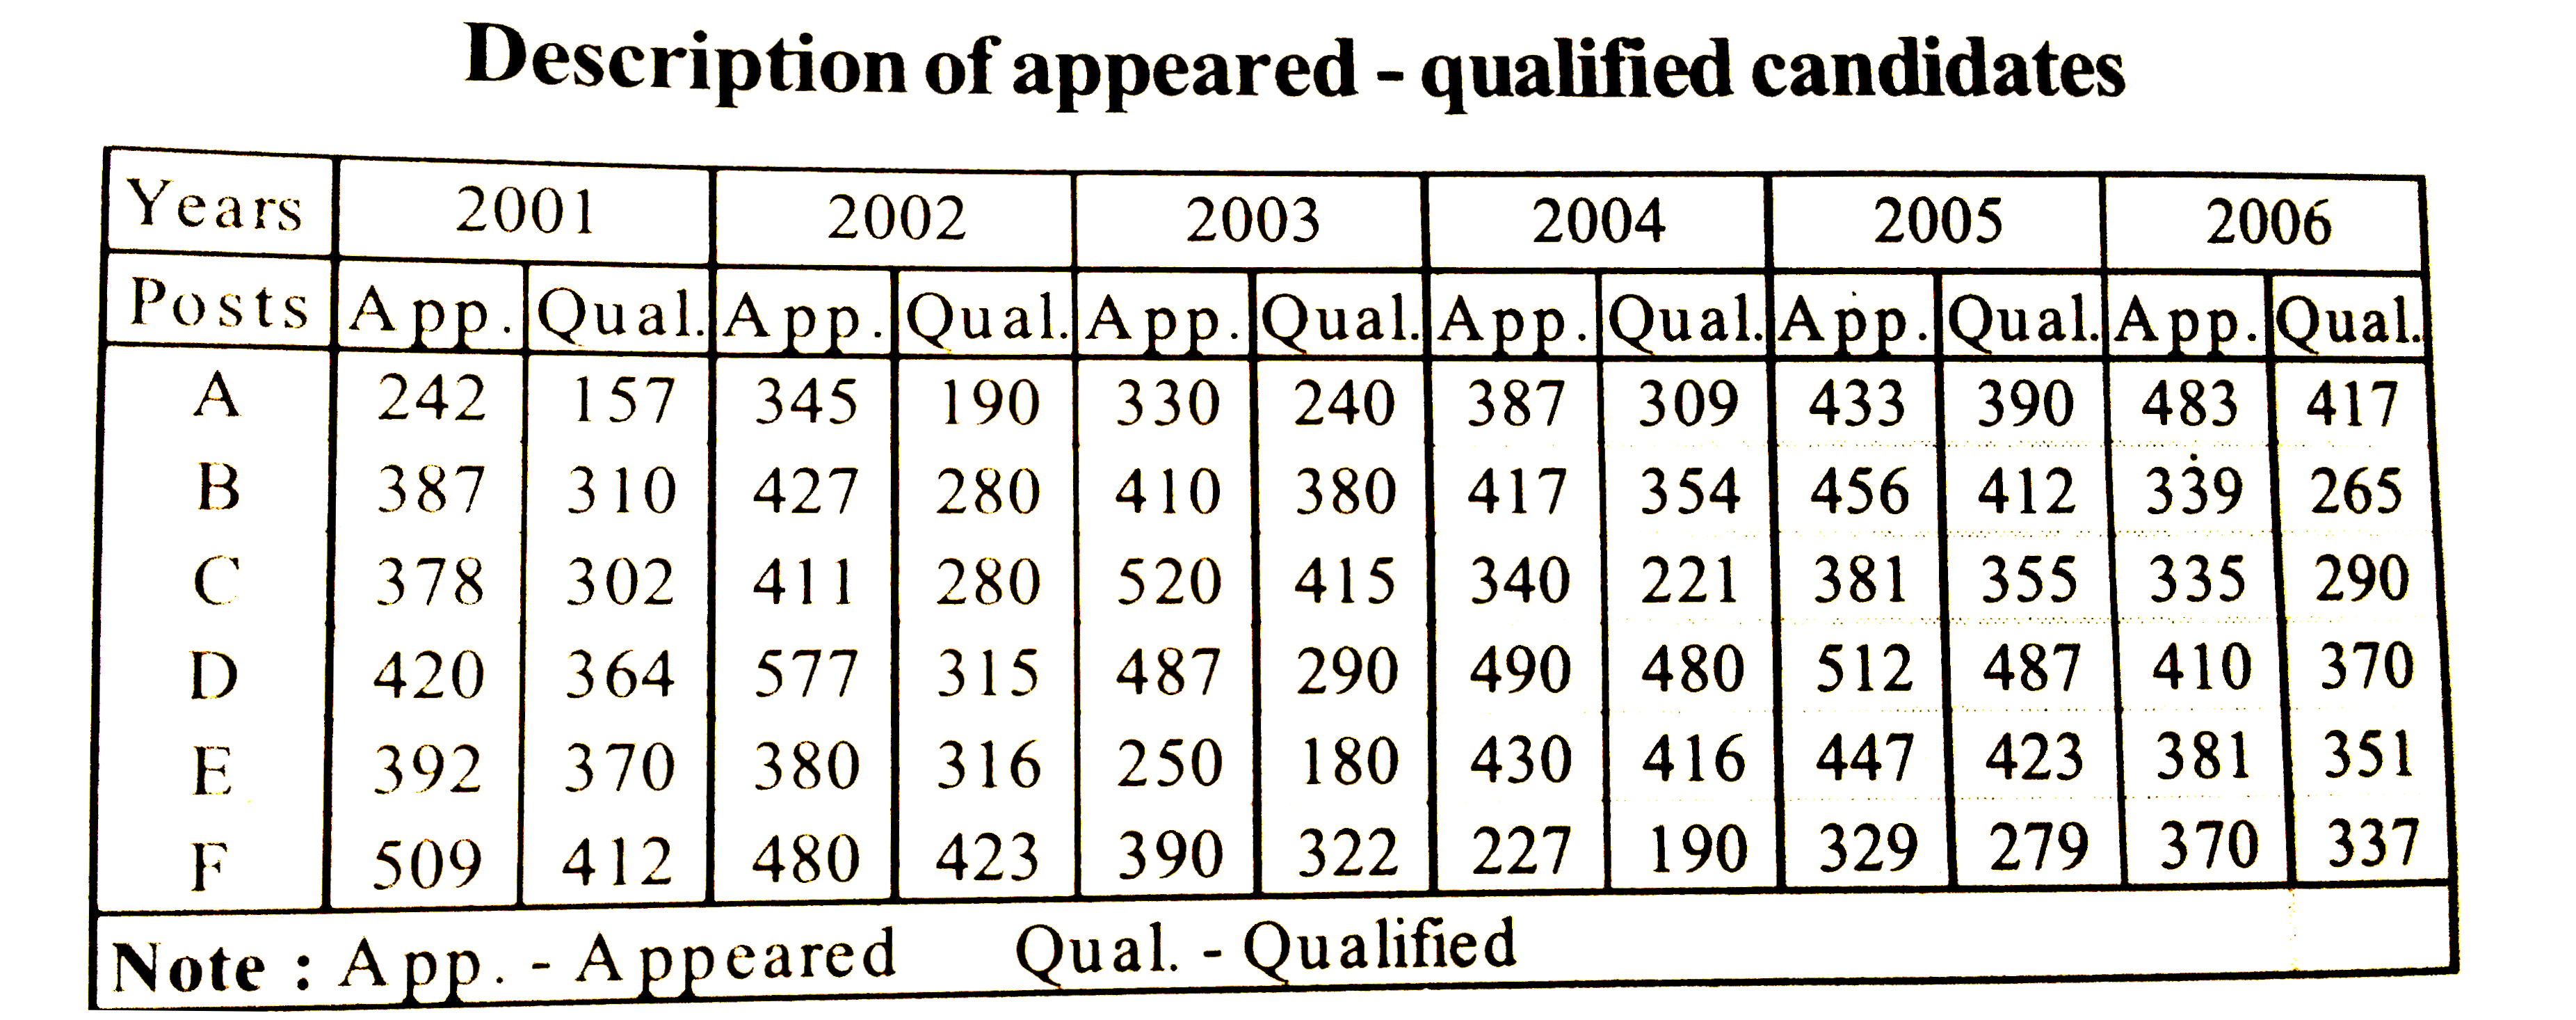 The average number of candidates who qualified for all the posts in the year 2004 is